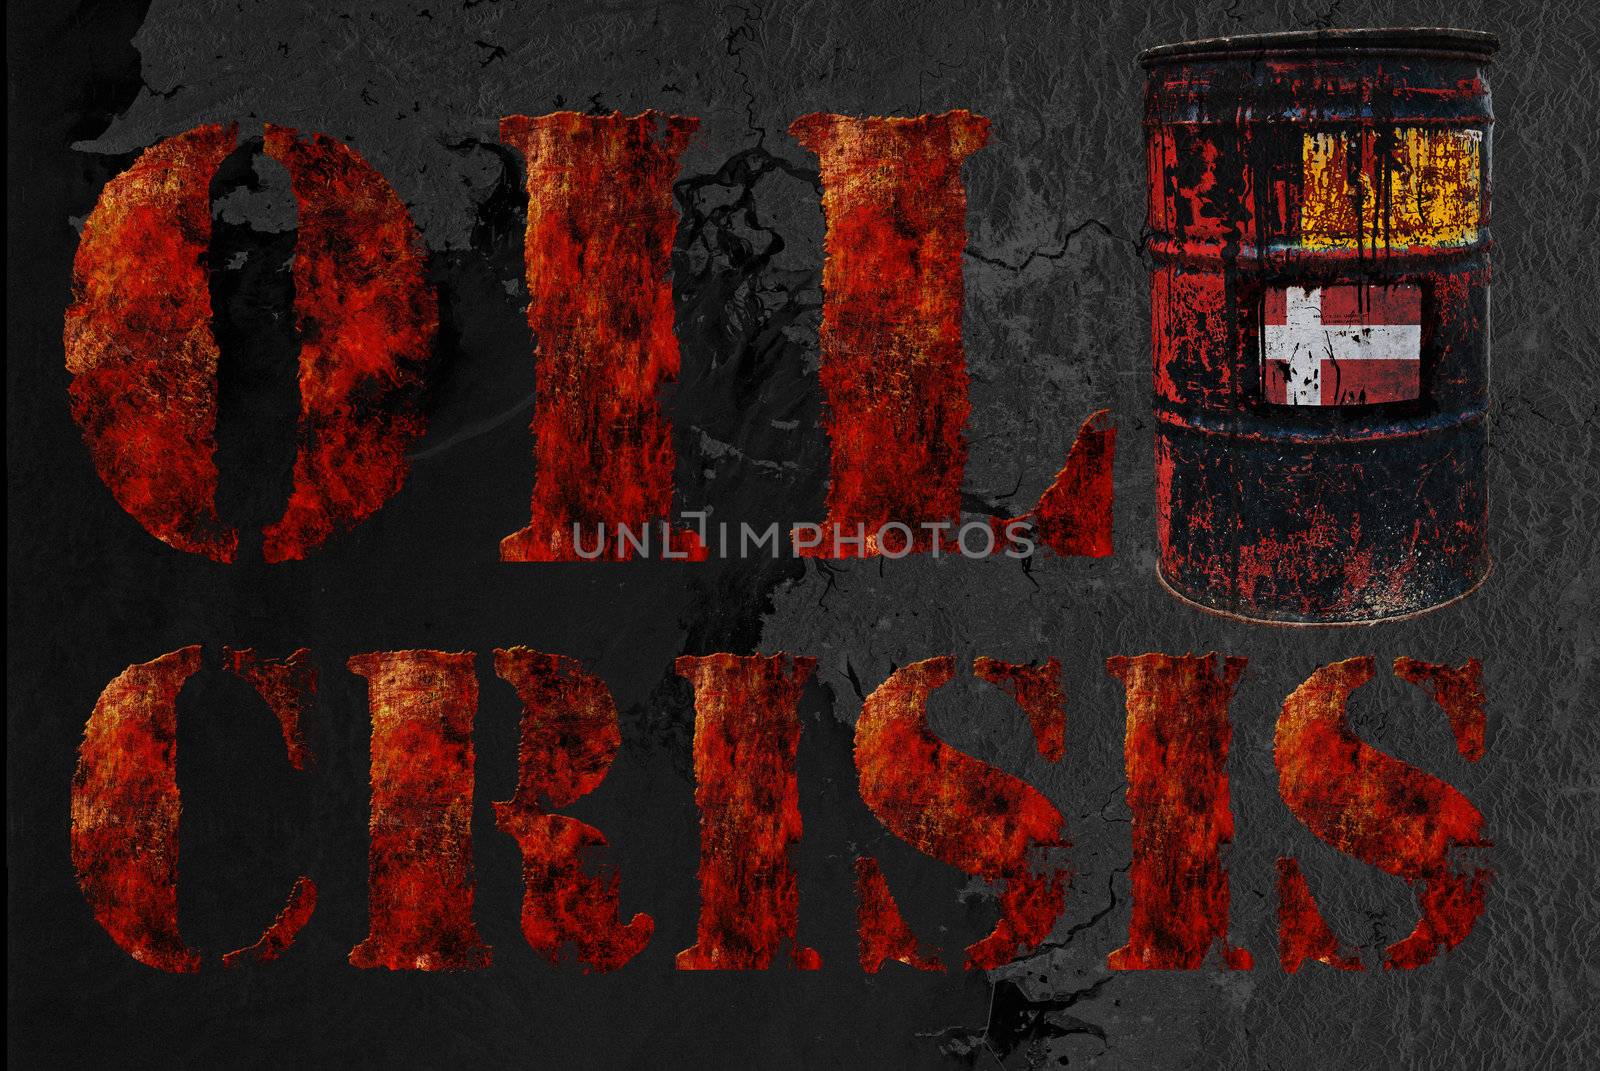 Global economic oil crisis with vintage rusty oil drum and grudge text background. Suitable for all oil crisis economic business concept, logo, icon design. With Denmark flag.